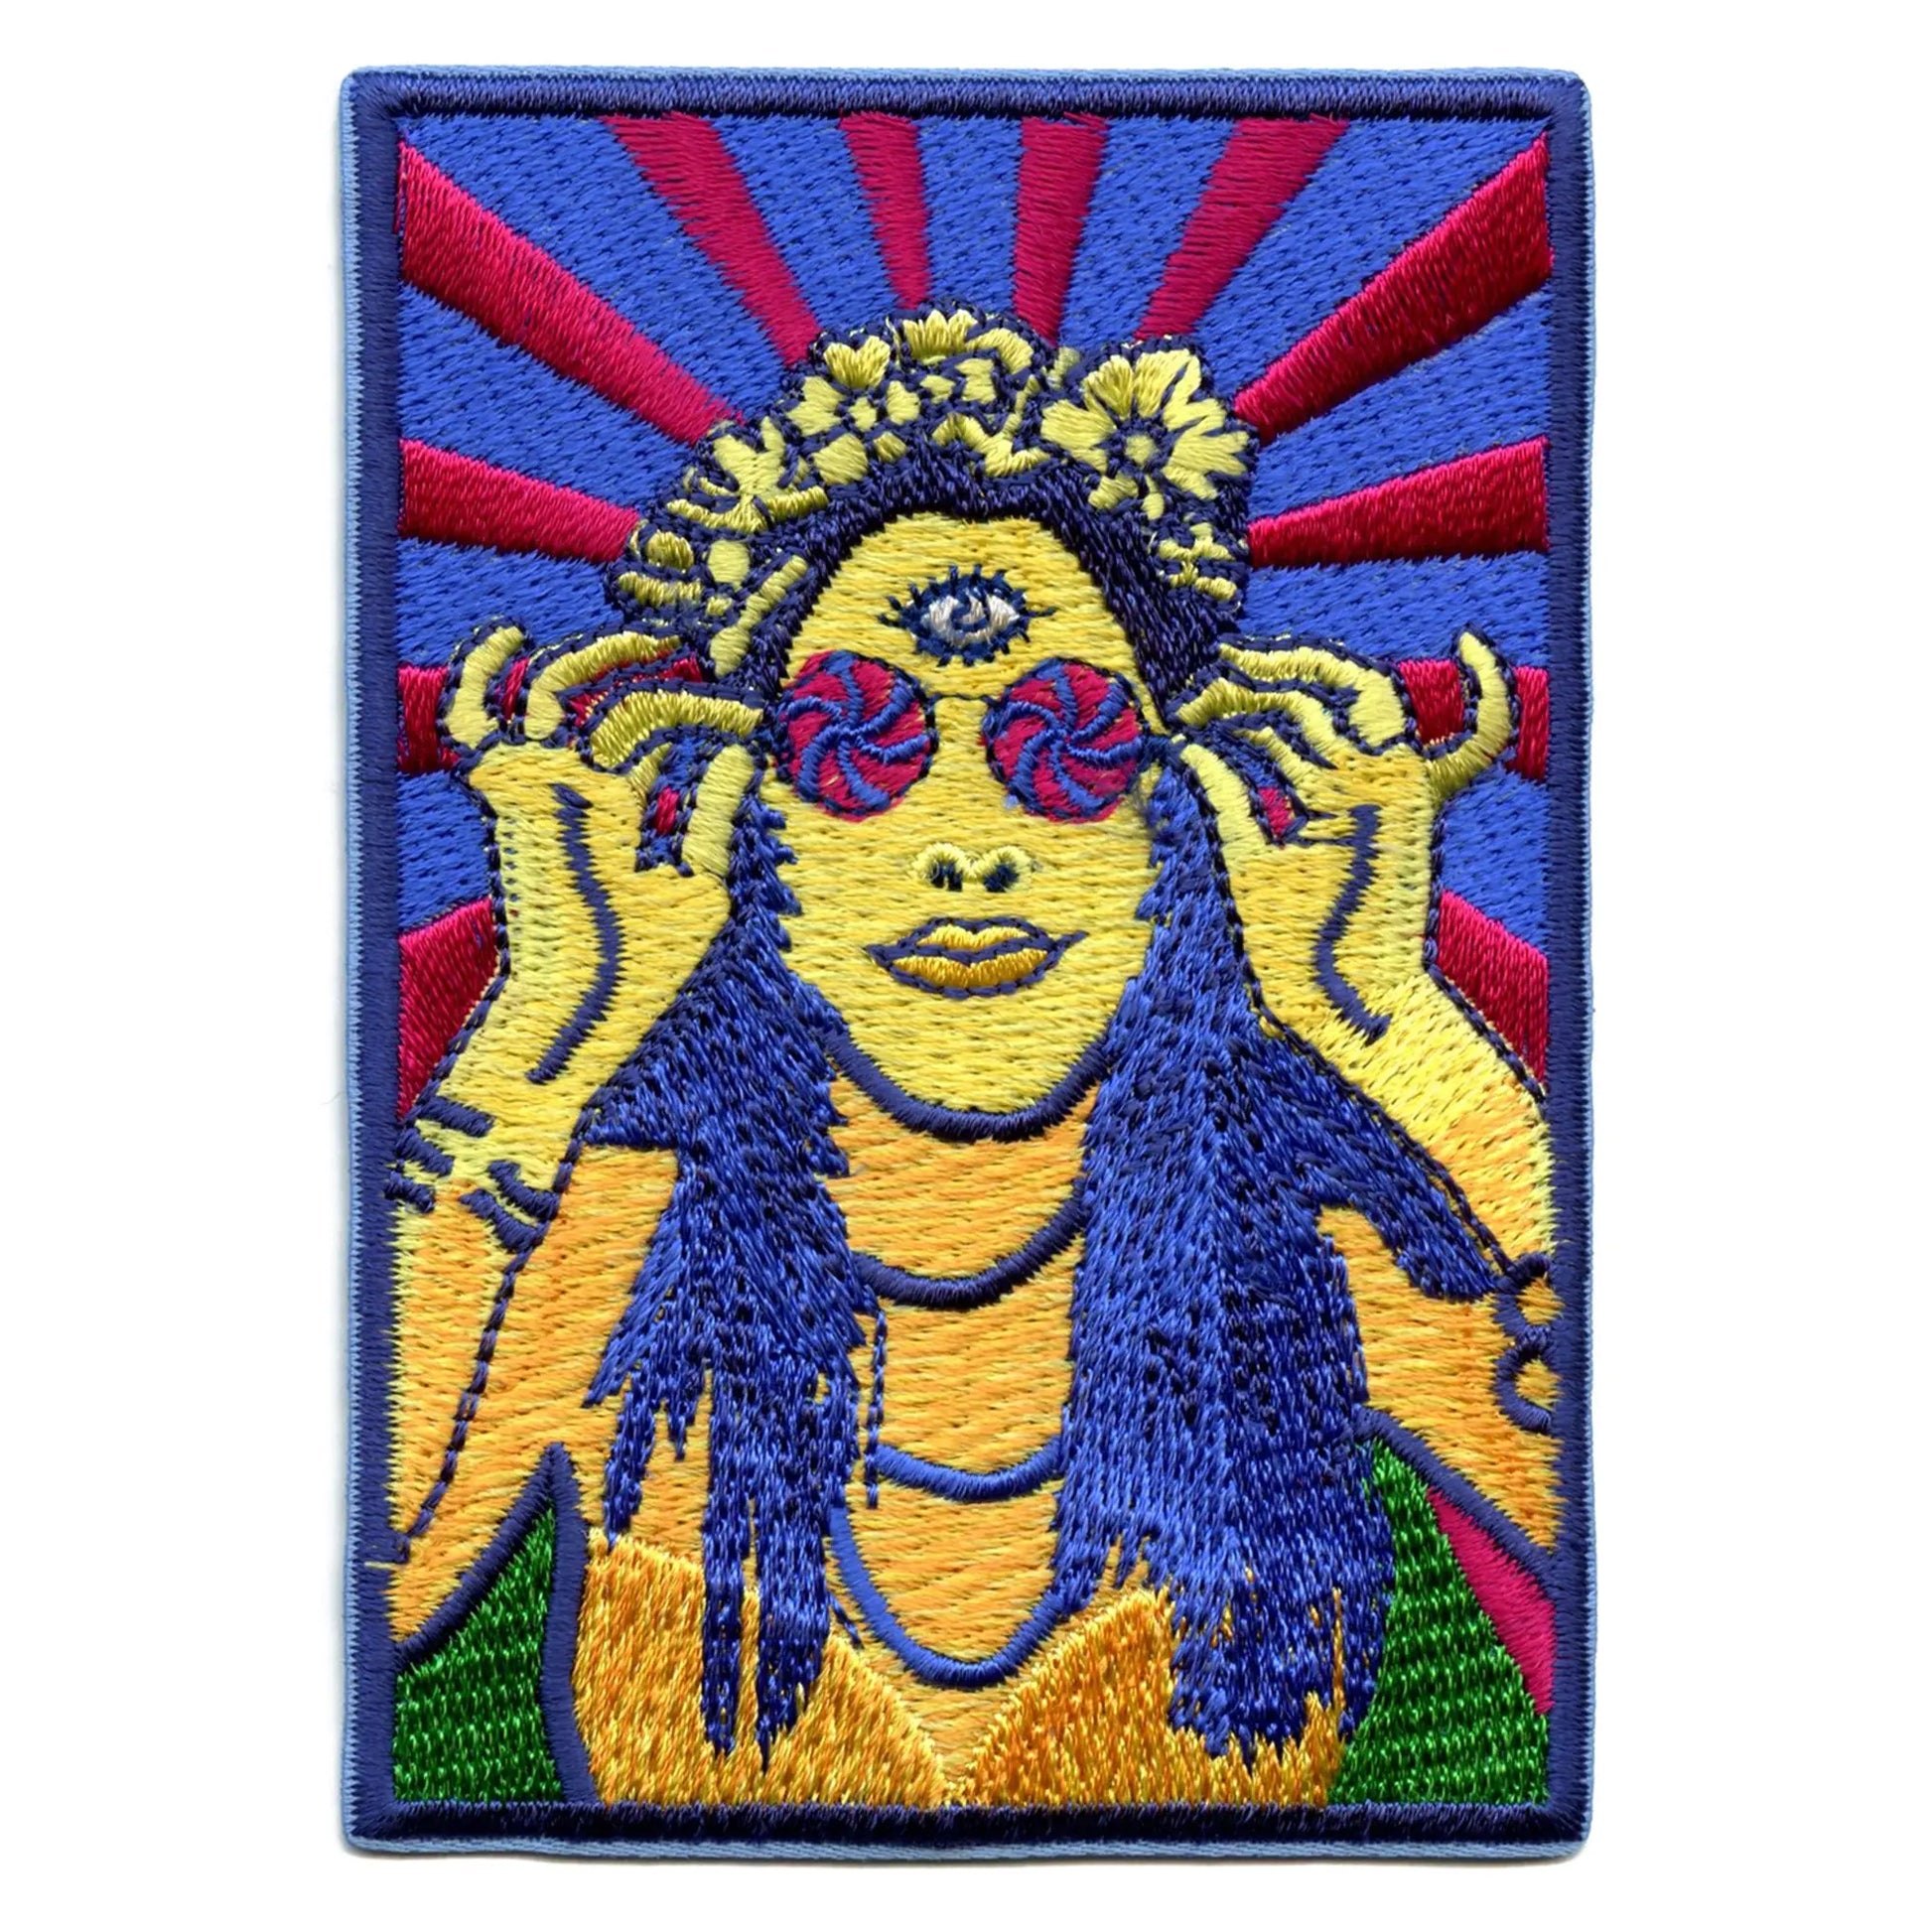 Hippie Chick Patch Psychedelic Style Embroidered Iron On 